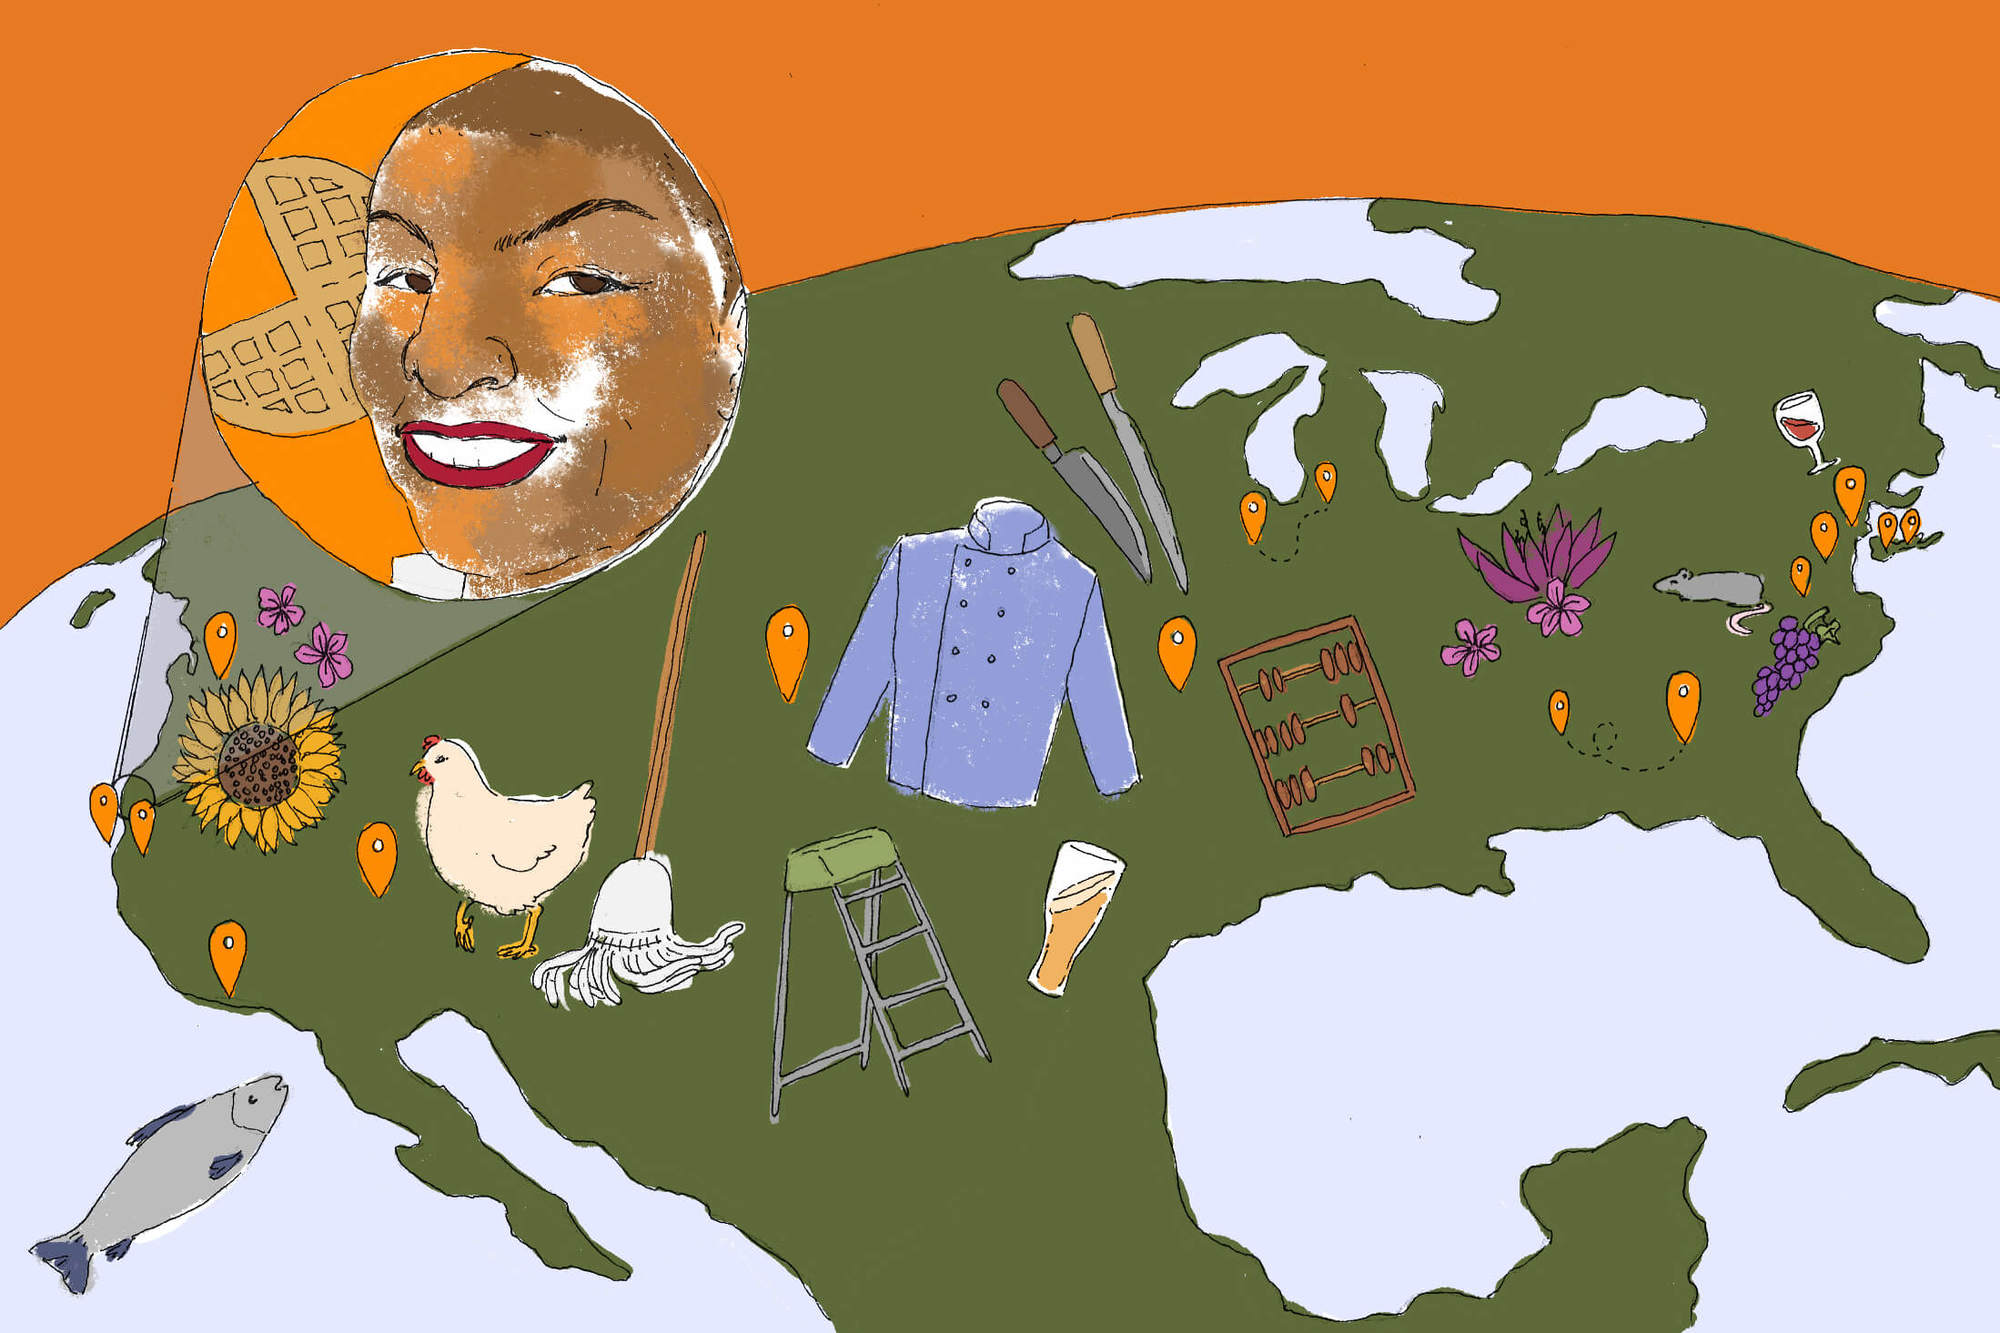 North America map of Invisible Businesses and Tanya Holland portrait. September 2020